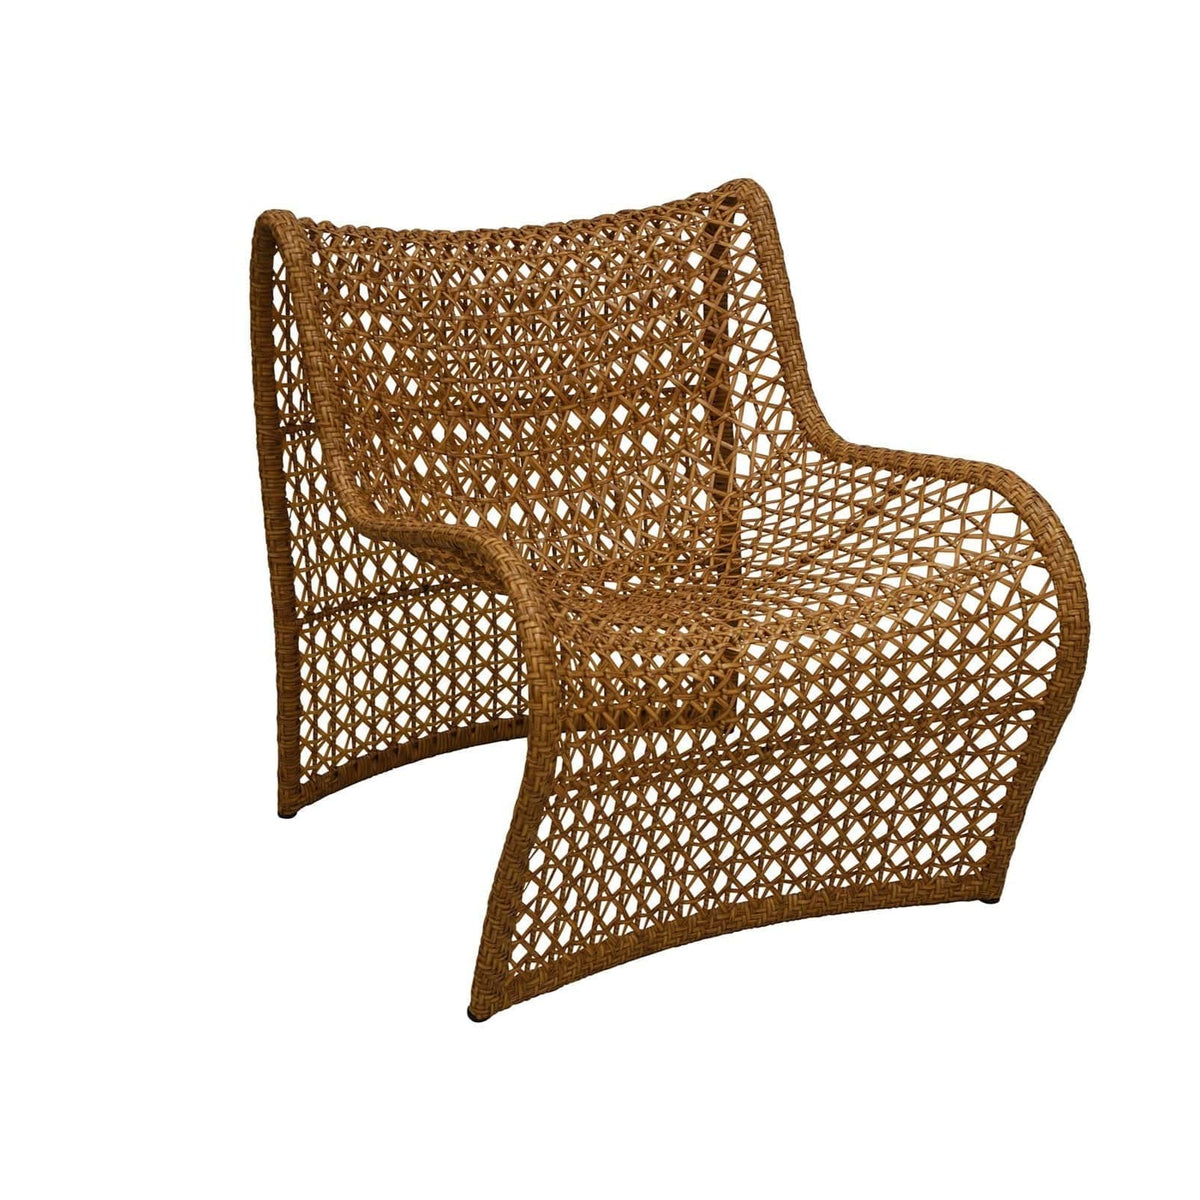 A wave chair made from cane. 